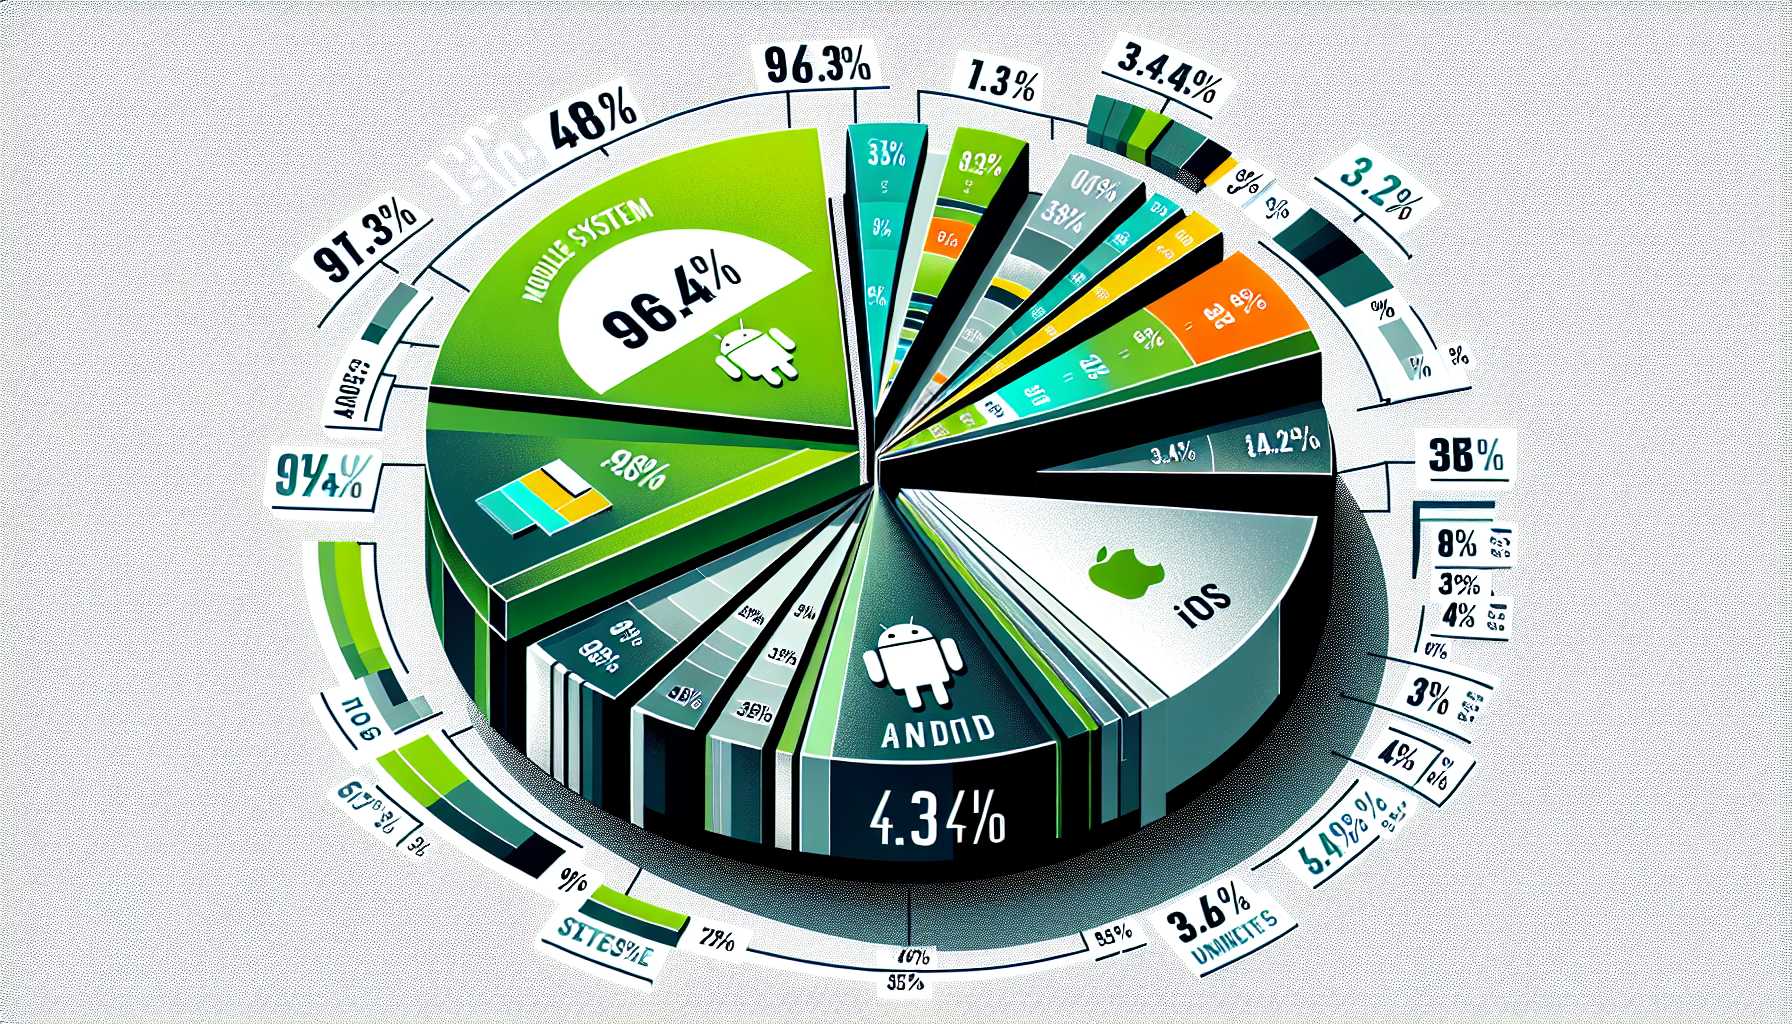 A pie chart showing Android with 96.43% market share and iOS with 3.43% market share in Brazil.